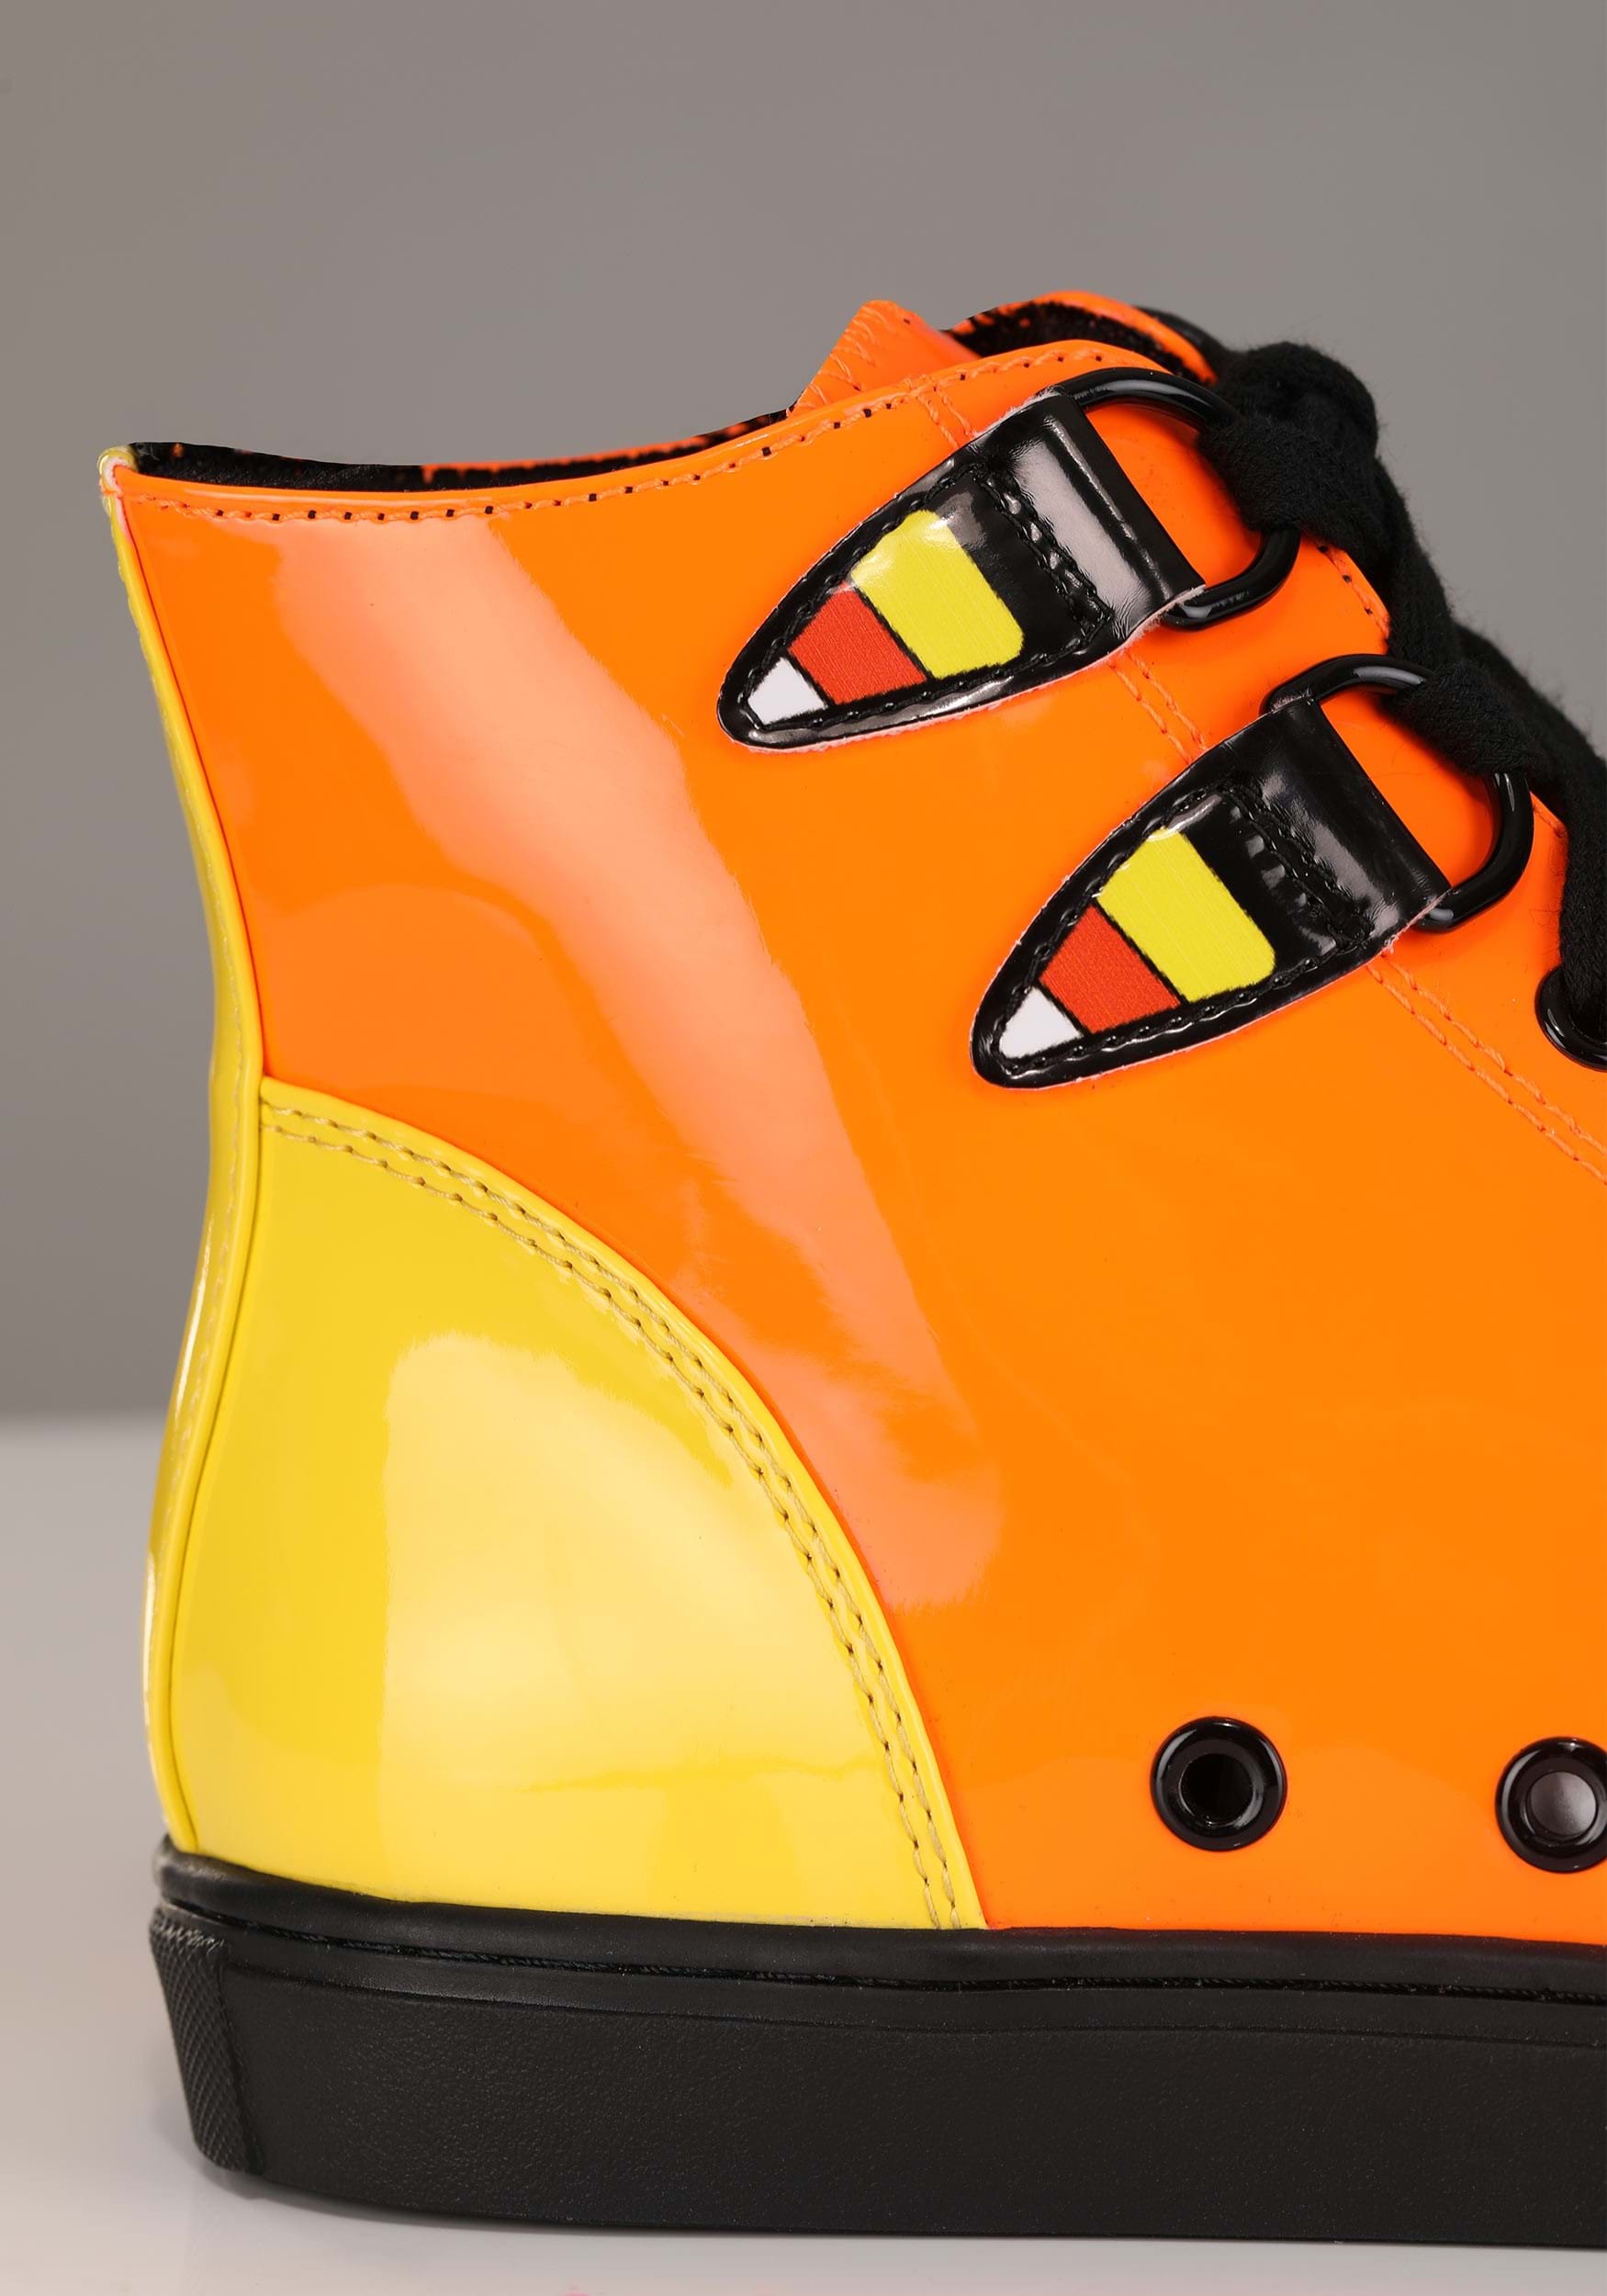 Chelsea Patent Candy Corn High Top Sneakers